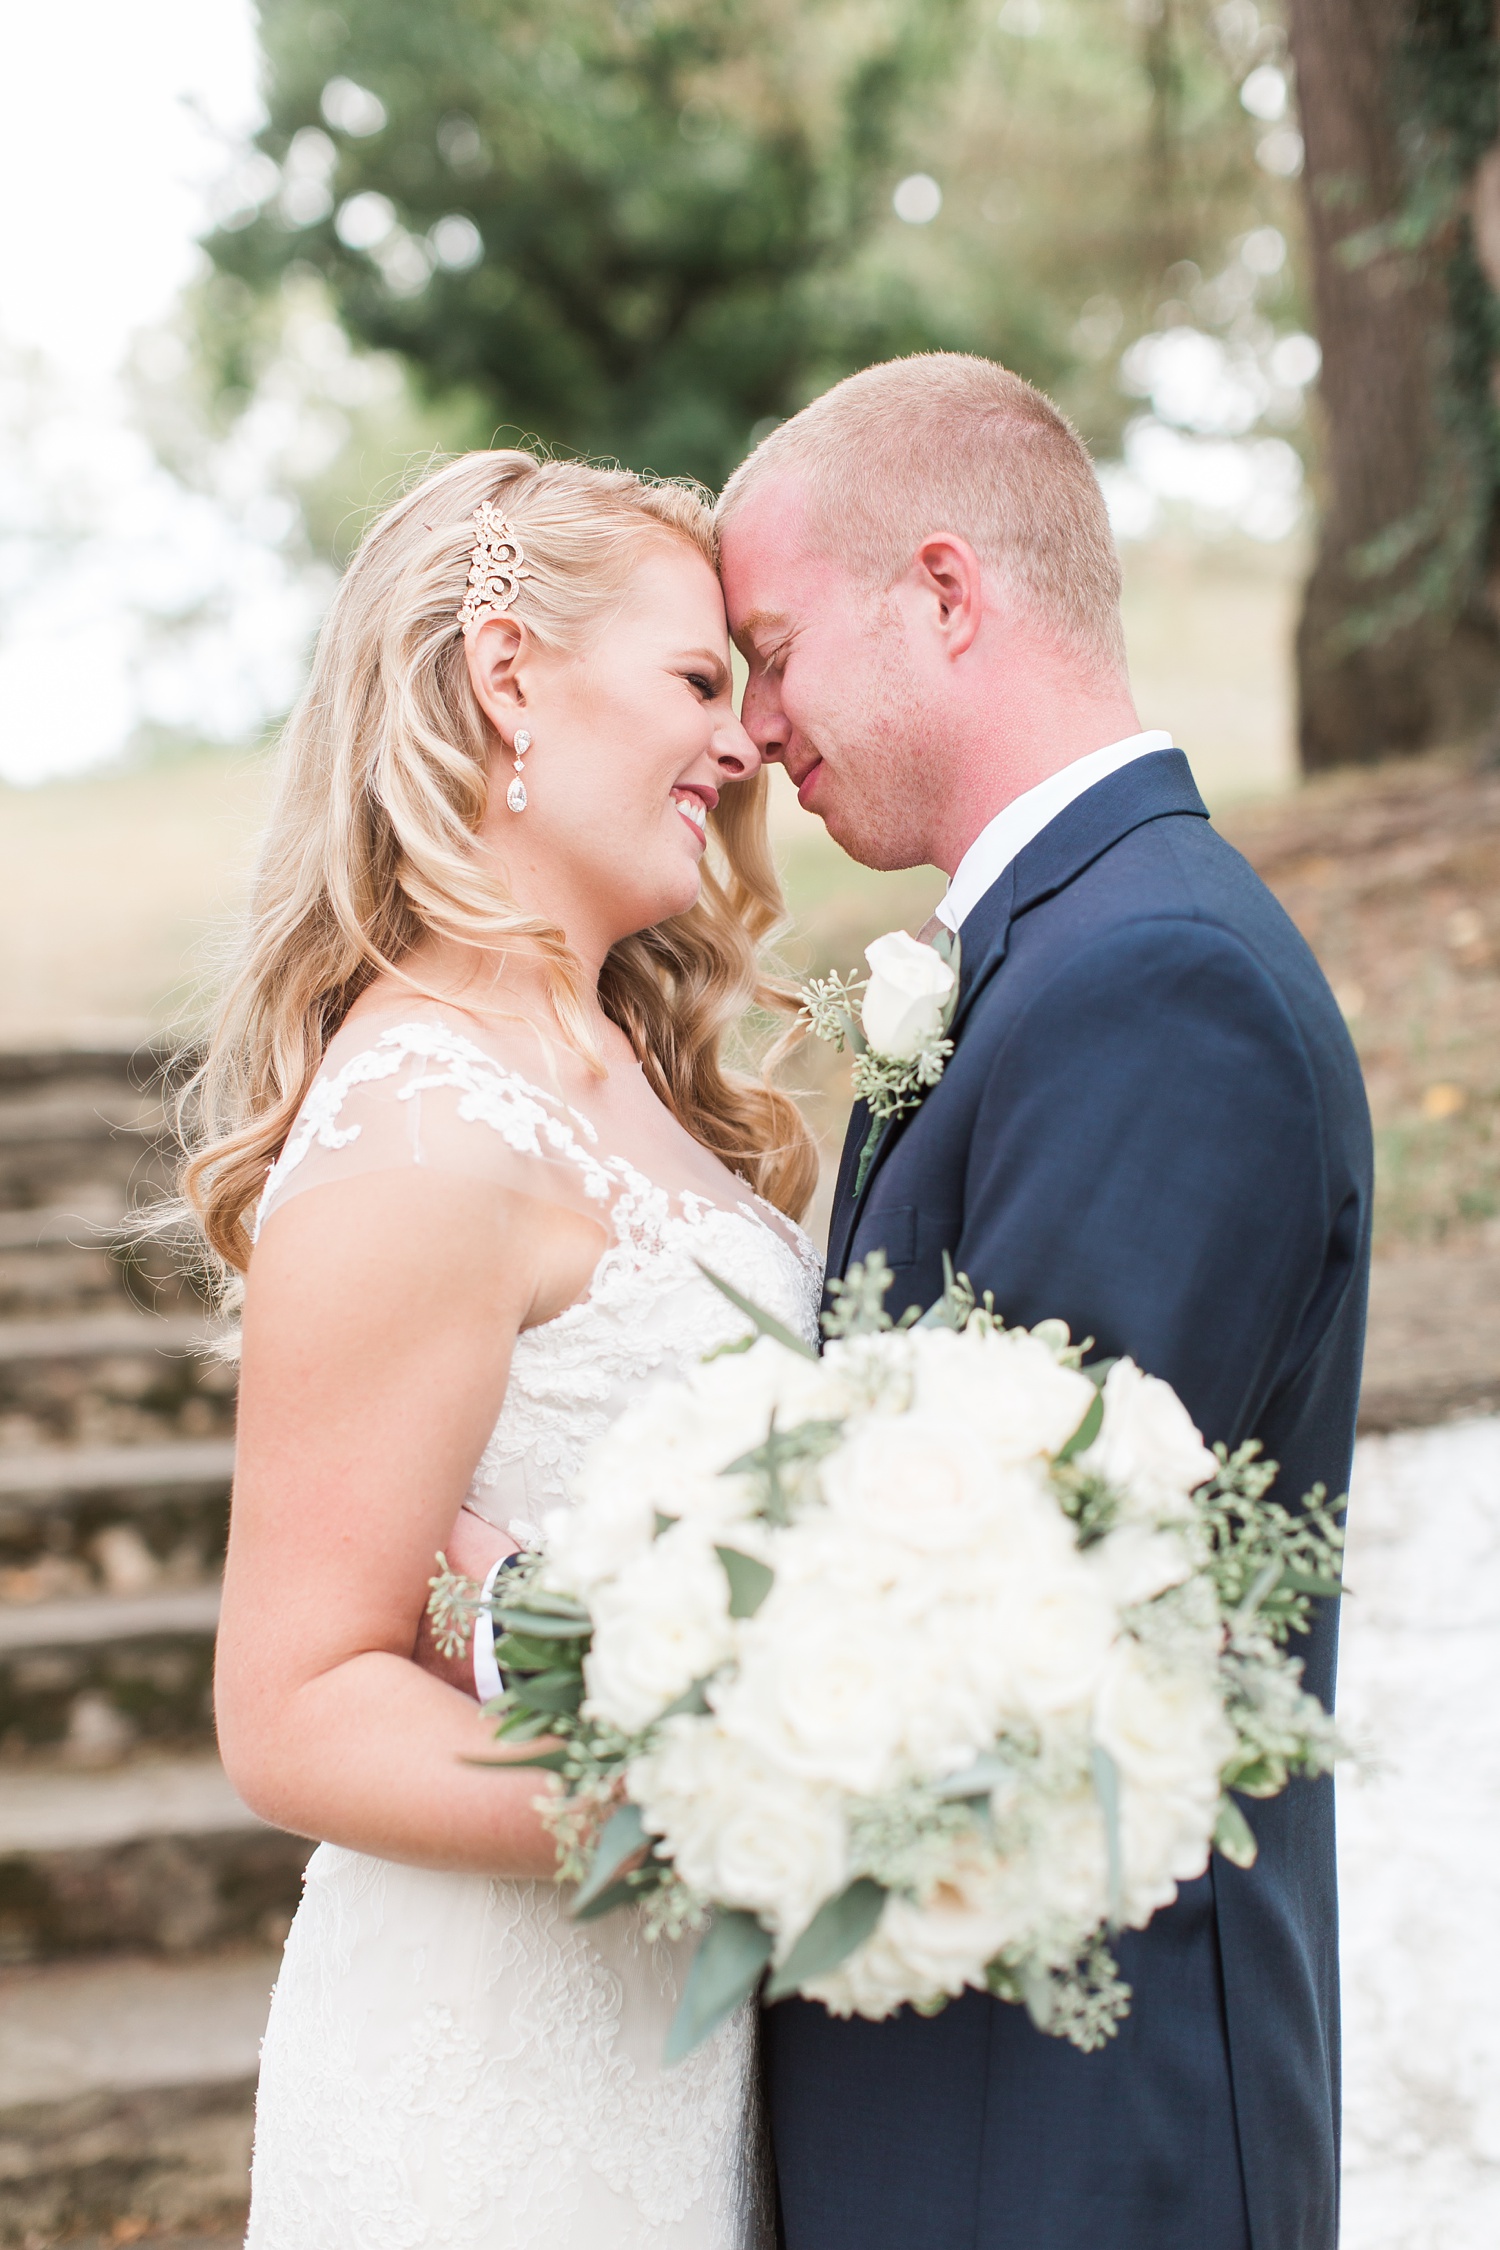 Philander Knox Estate at Valley Forge Wedding Photography | Fall Wedding Inspiration | Laura and Chris